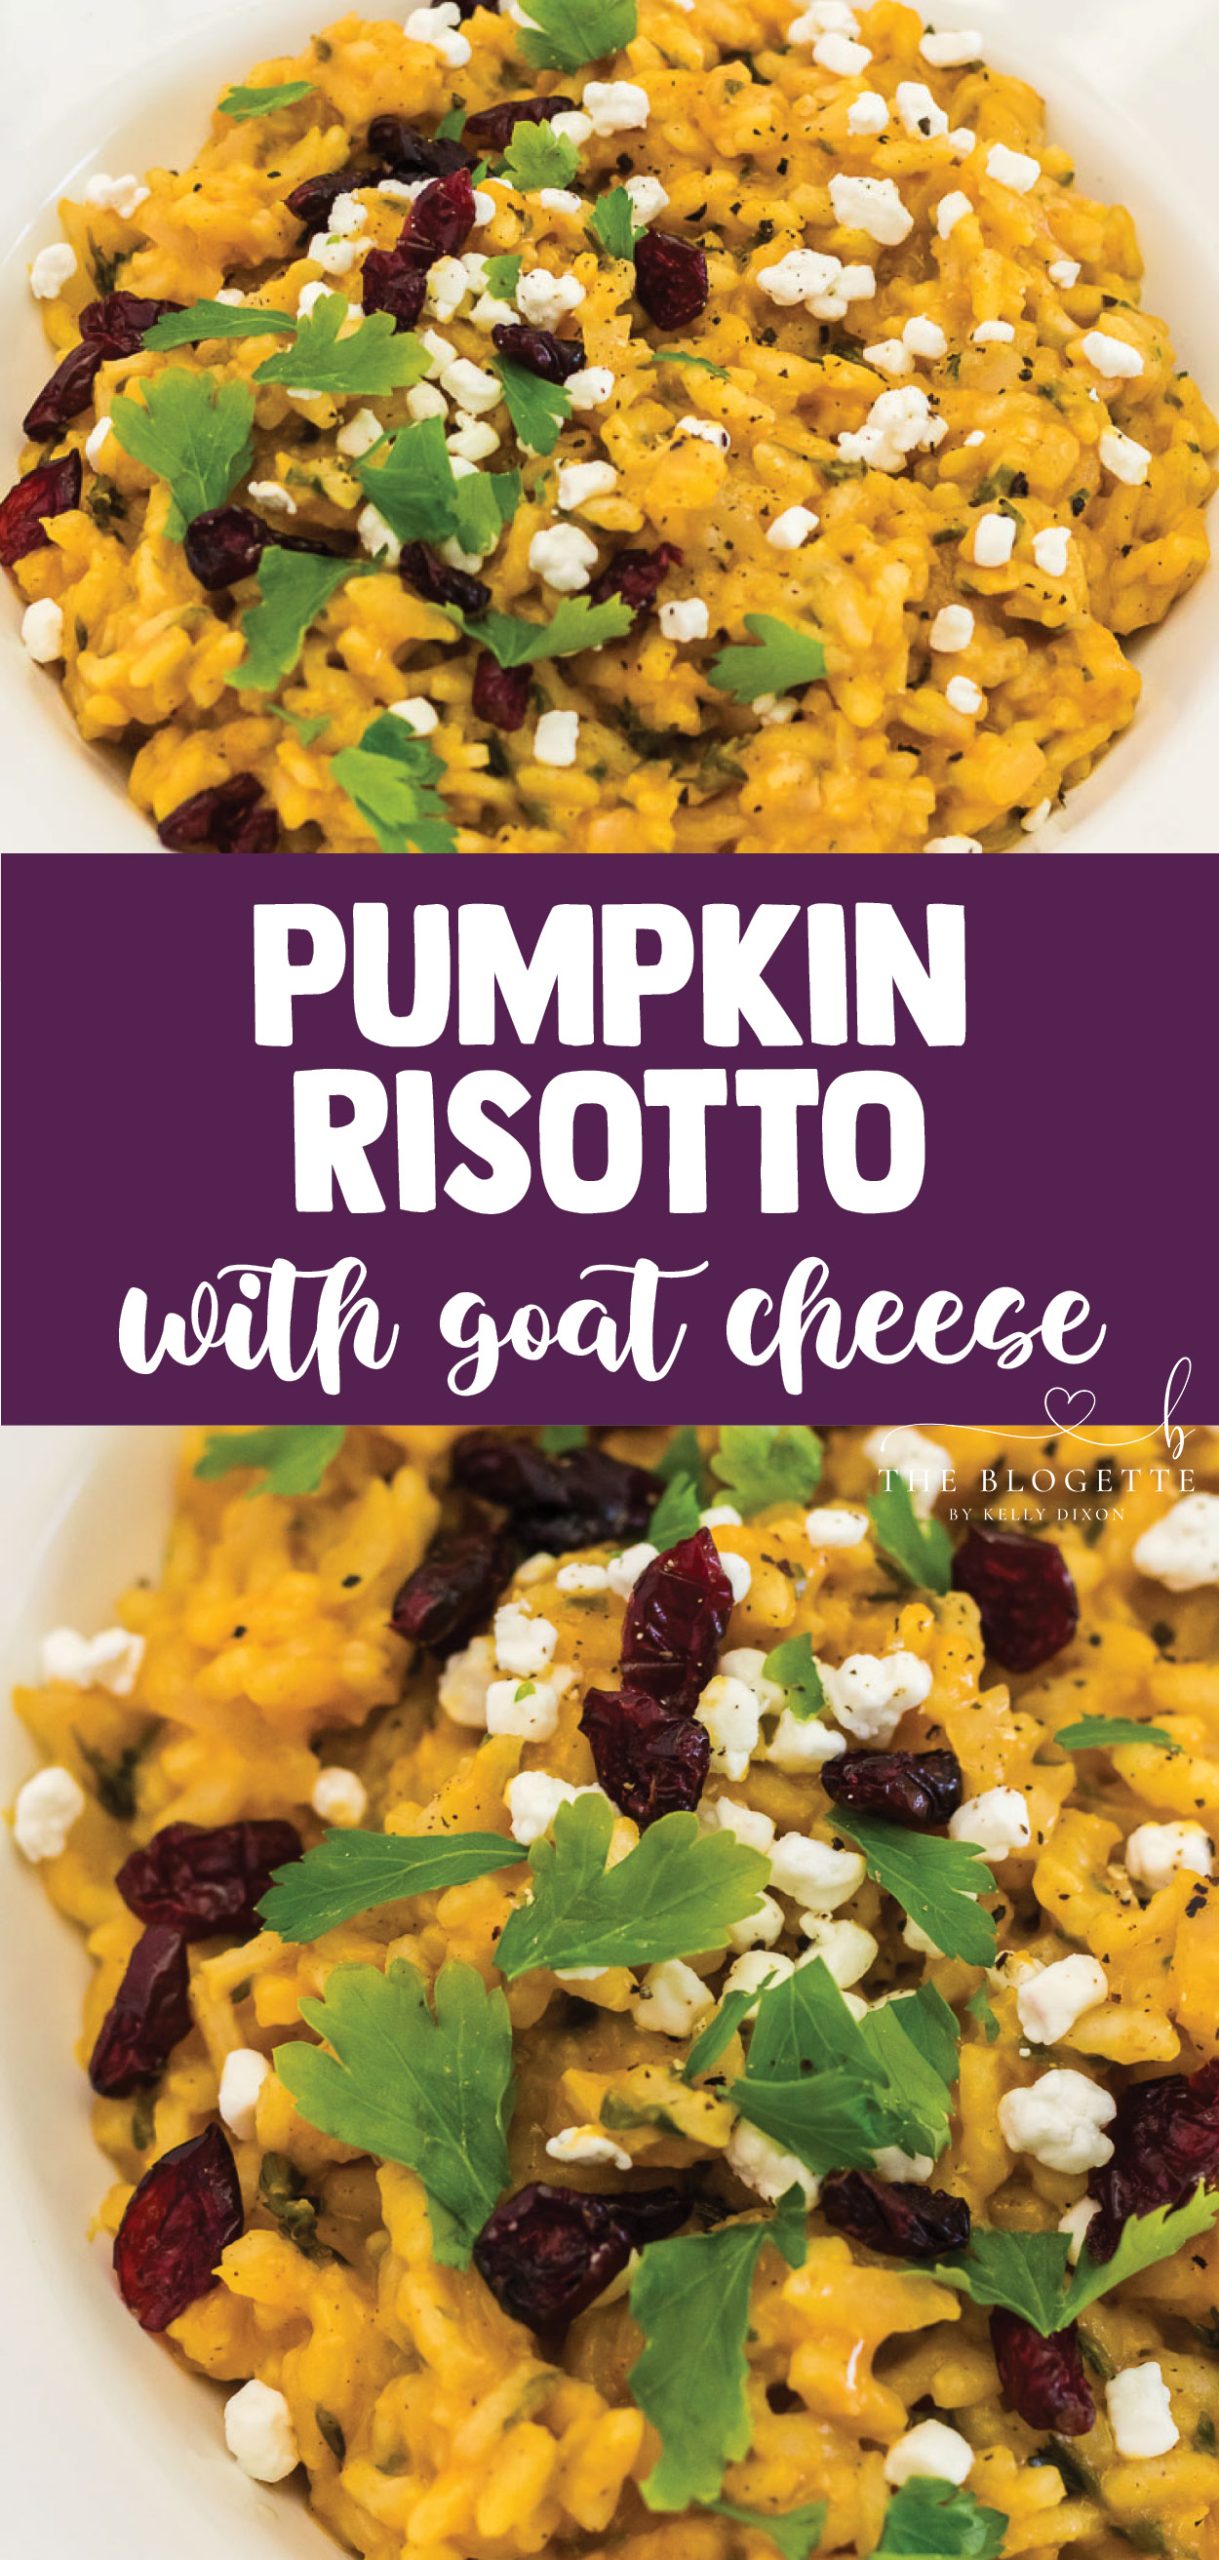 This Pumpkin Risotto with Goat Cheese & Dried Cranberries is a perfect fall comfort food - Rich, creamy and perfect for an elegant weeknight meal. Perfect for vegetarian guests at Thanksgiving!